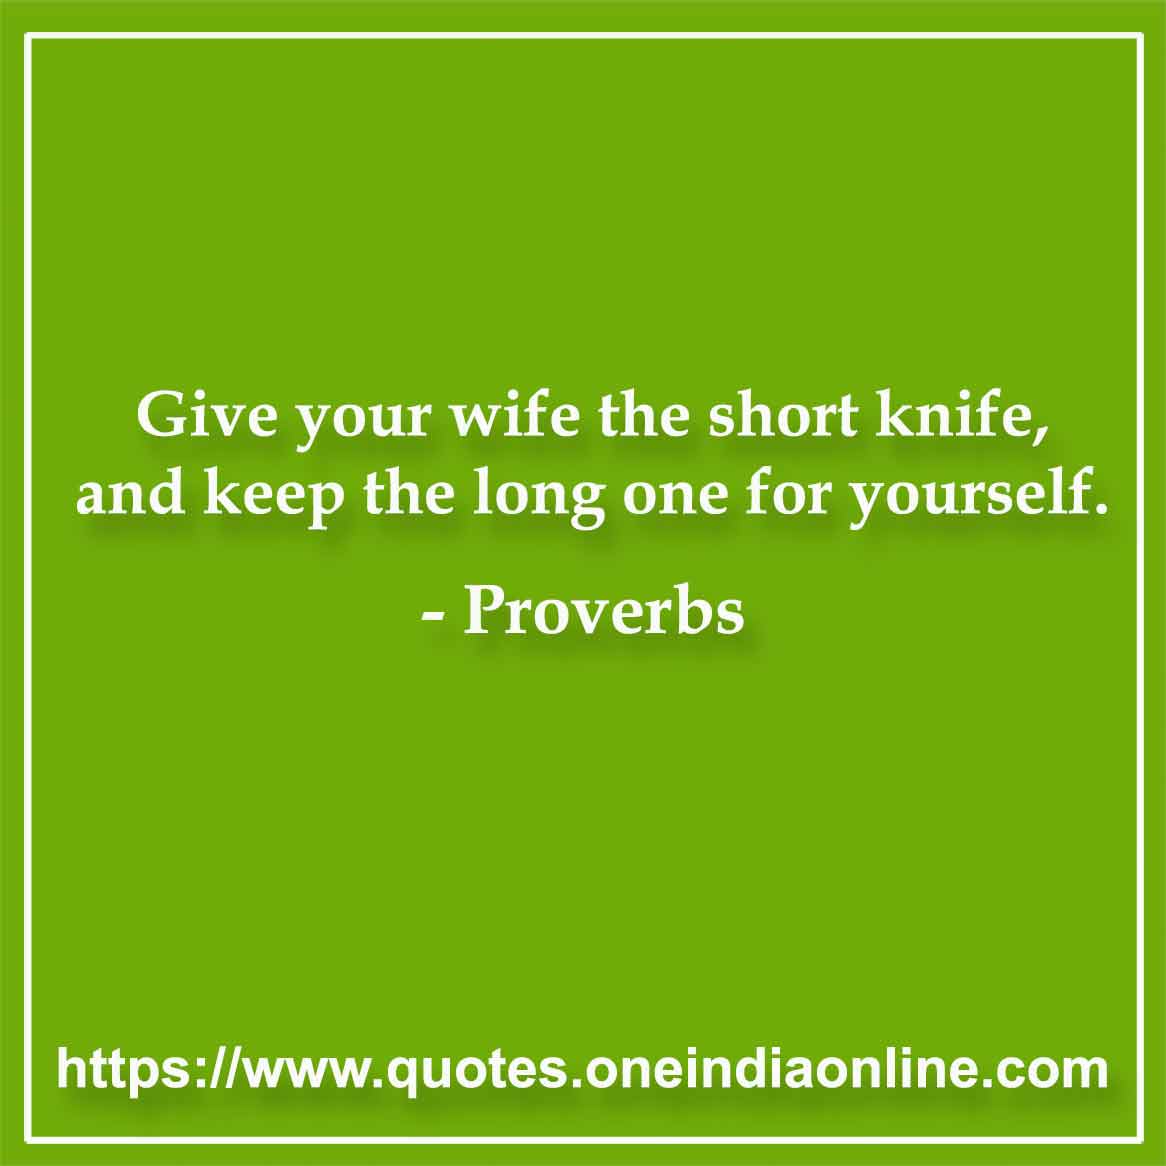 Give your wife the short knife, and keep the long one for yourself.

Danish Proverbs